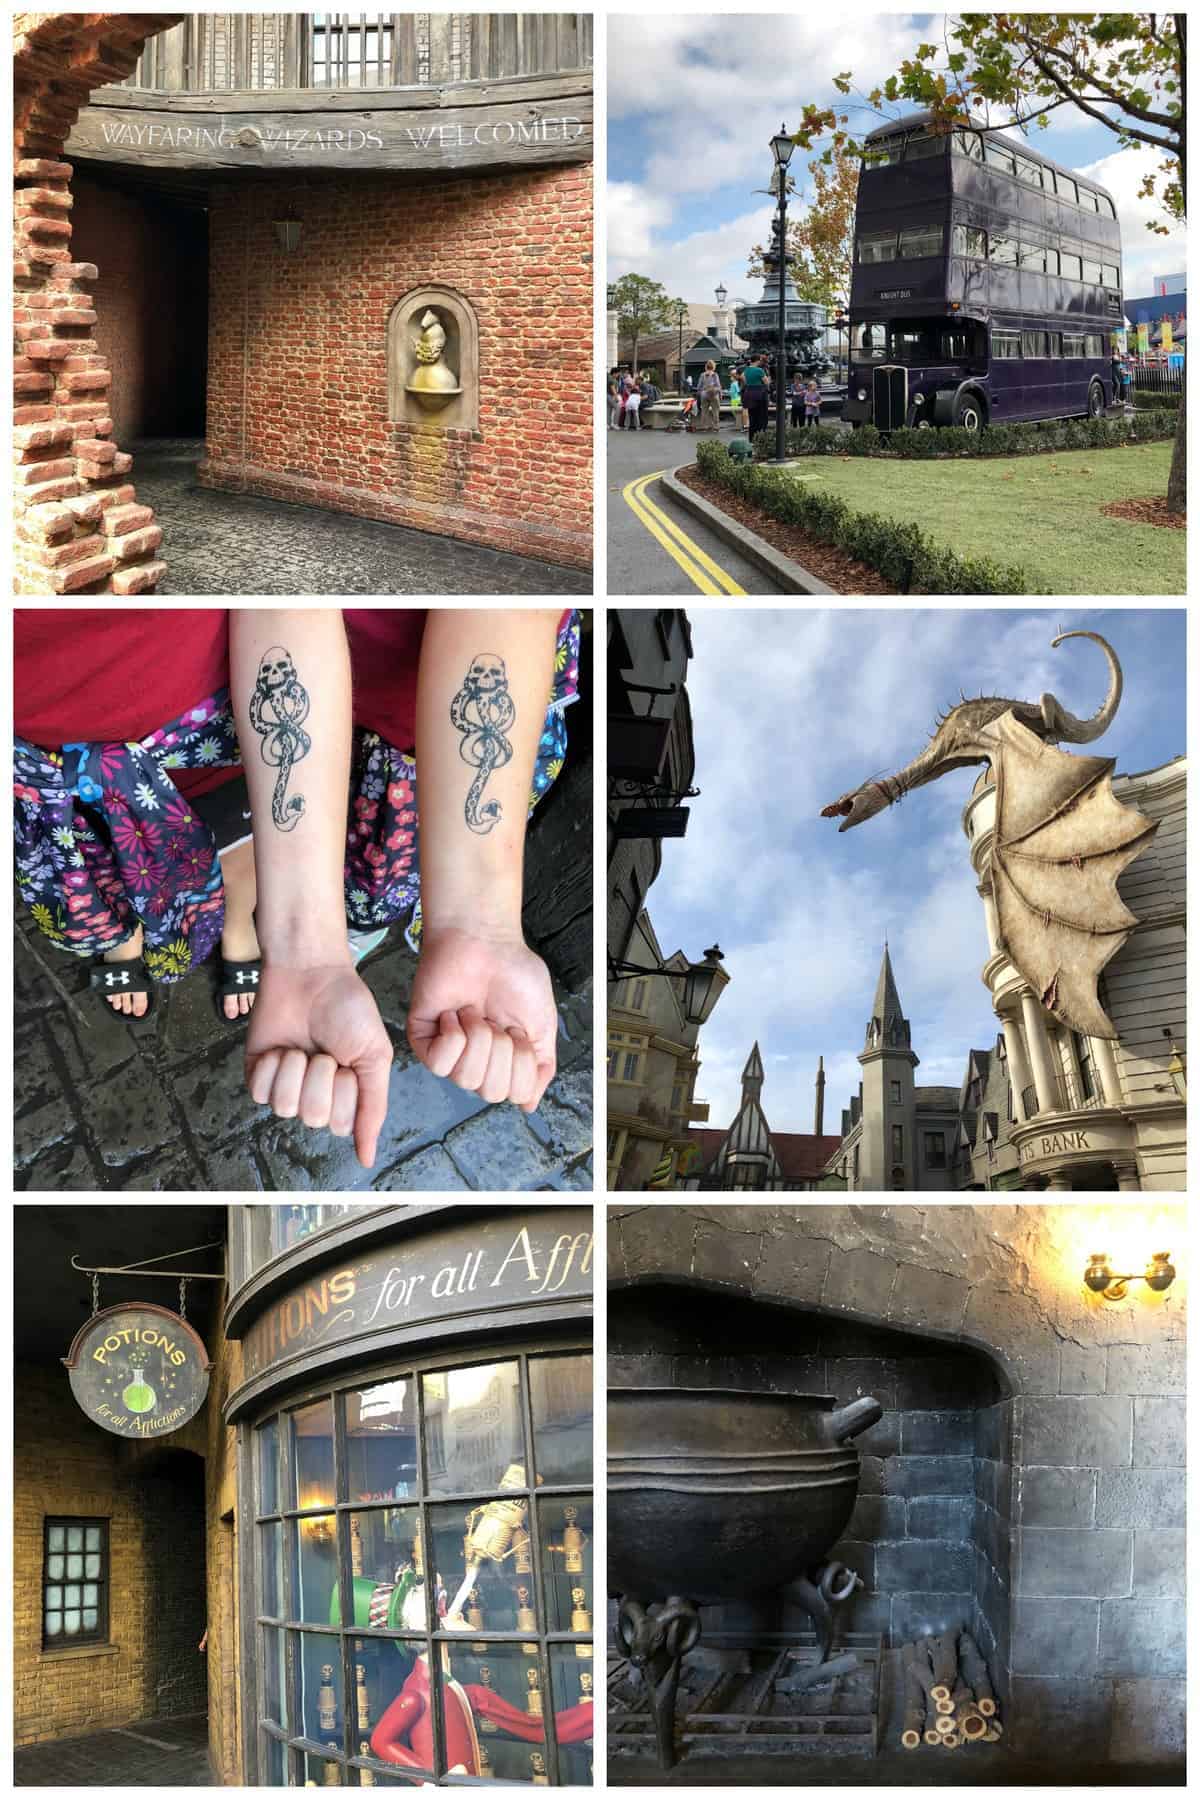 Wizarding World of Harry Potter Tips - Universal Orlando Tips: Should you get the Universal Express Unlimited? Is Universals early entry worth it? Compare Universal Studio hotels and more. Great mom-to-mom tips for planning your family vacation to Orlando. #HarryPotterWorld #UniversalOrlando #FamilyTravel #UniversalStudios #Orlando #Florida *Pinning this REAL parent advice for our trip! So helpful. Diagon Alley sounds AWESOME.